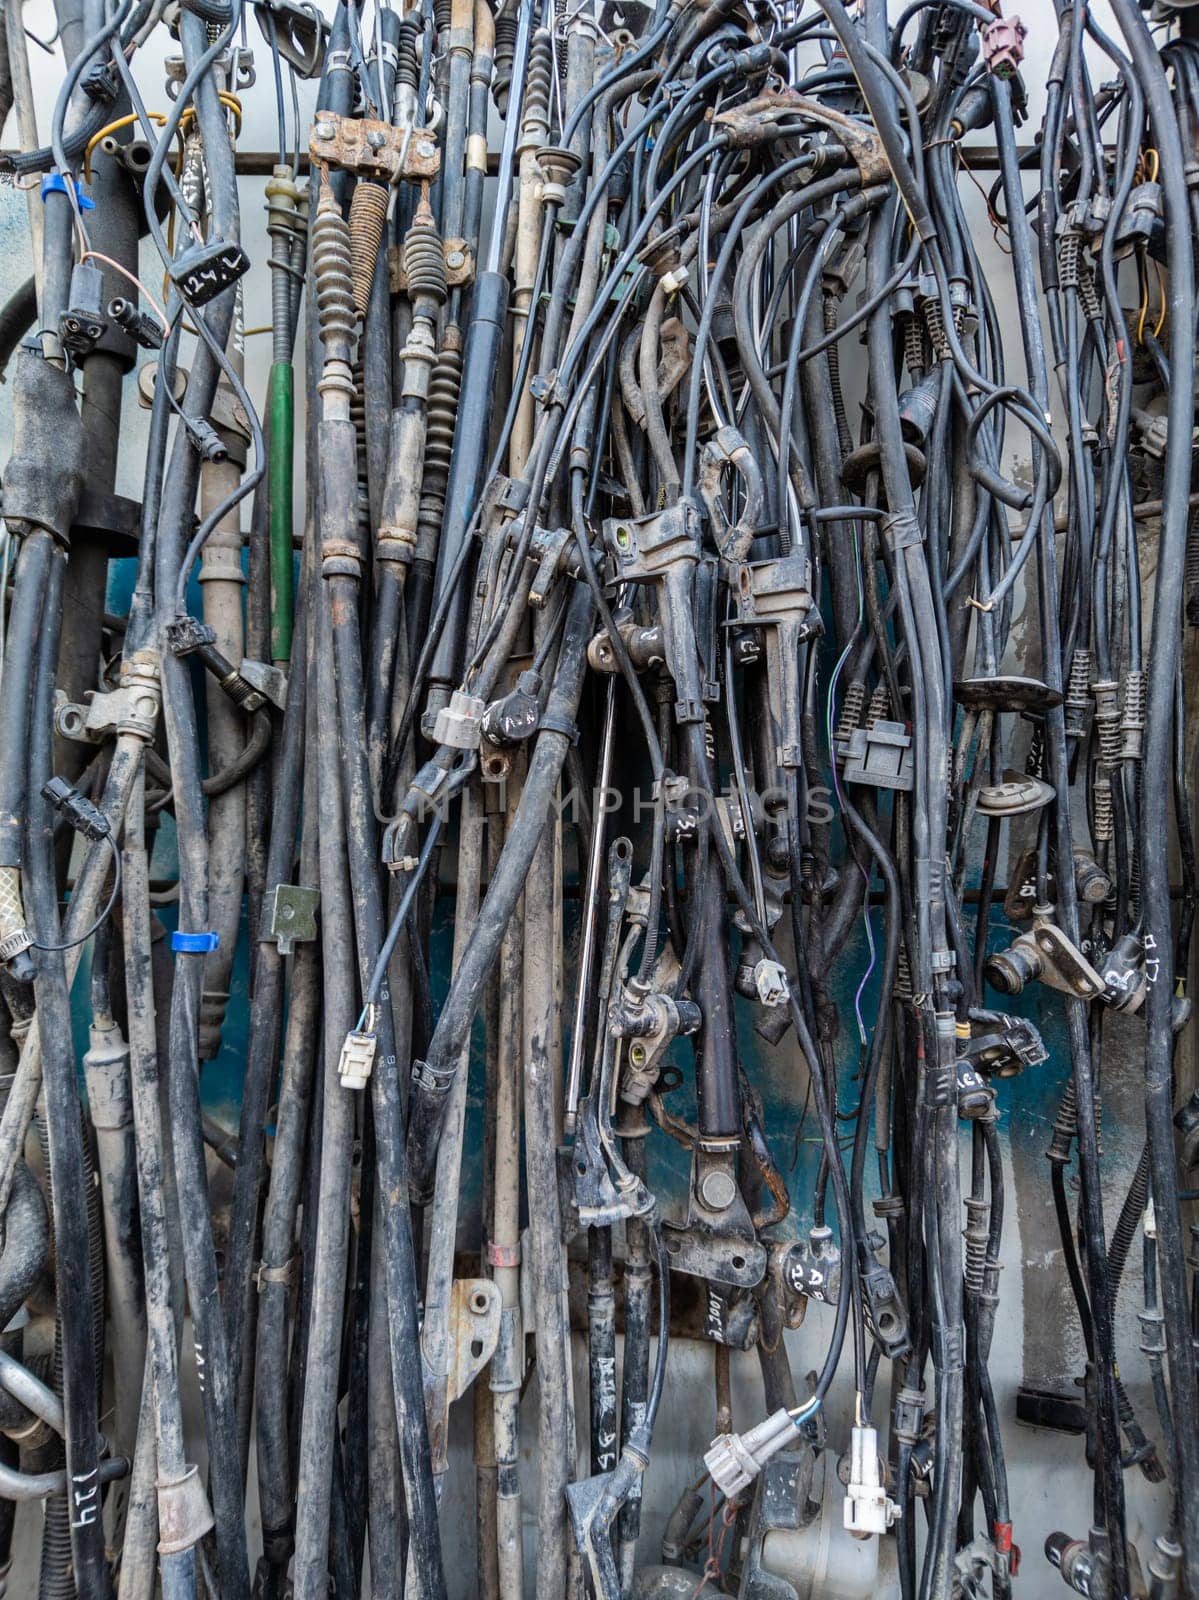 used car tubes and electrical wires hanging on the wall at junkyard market by z1b